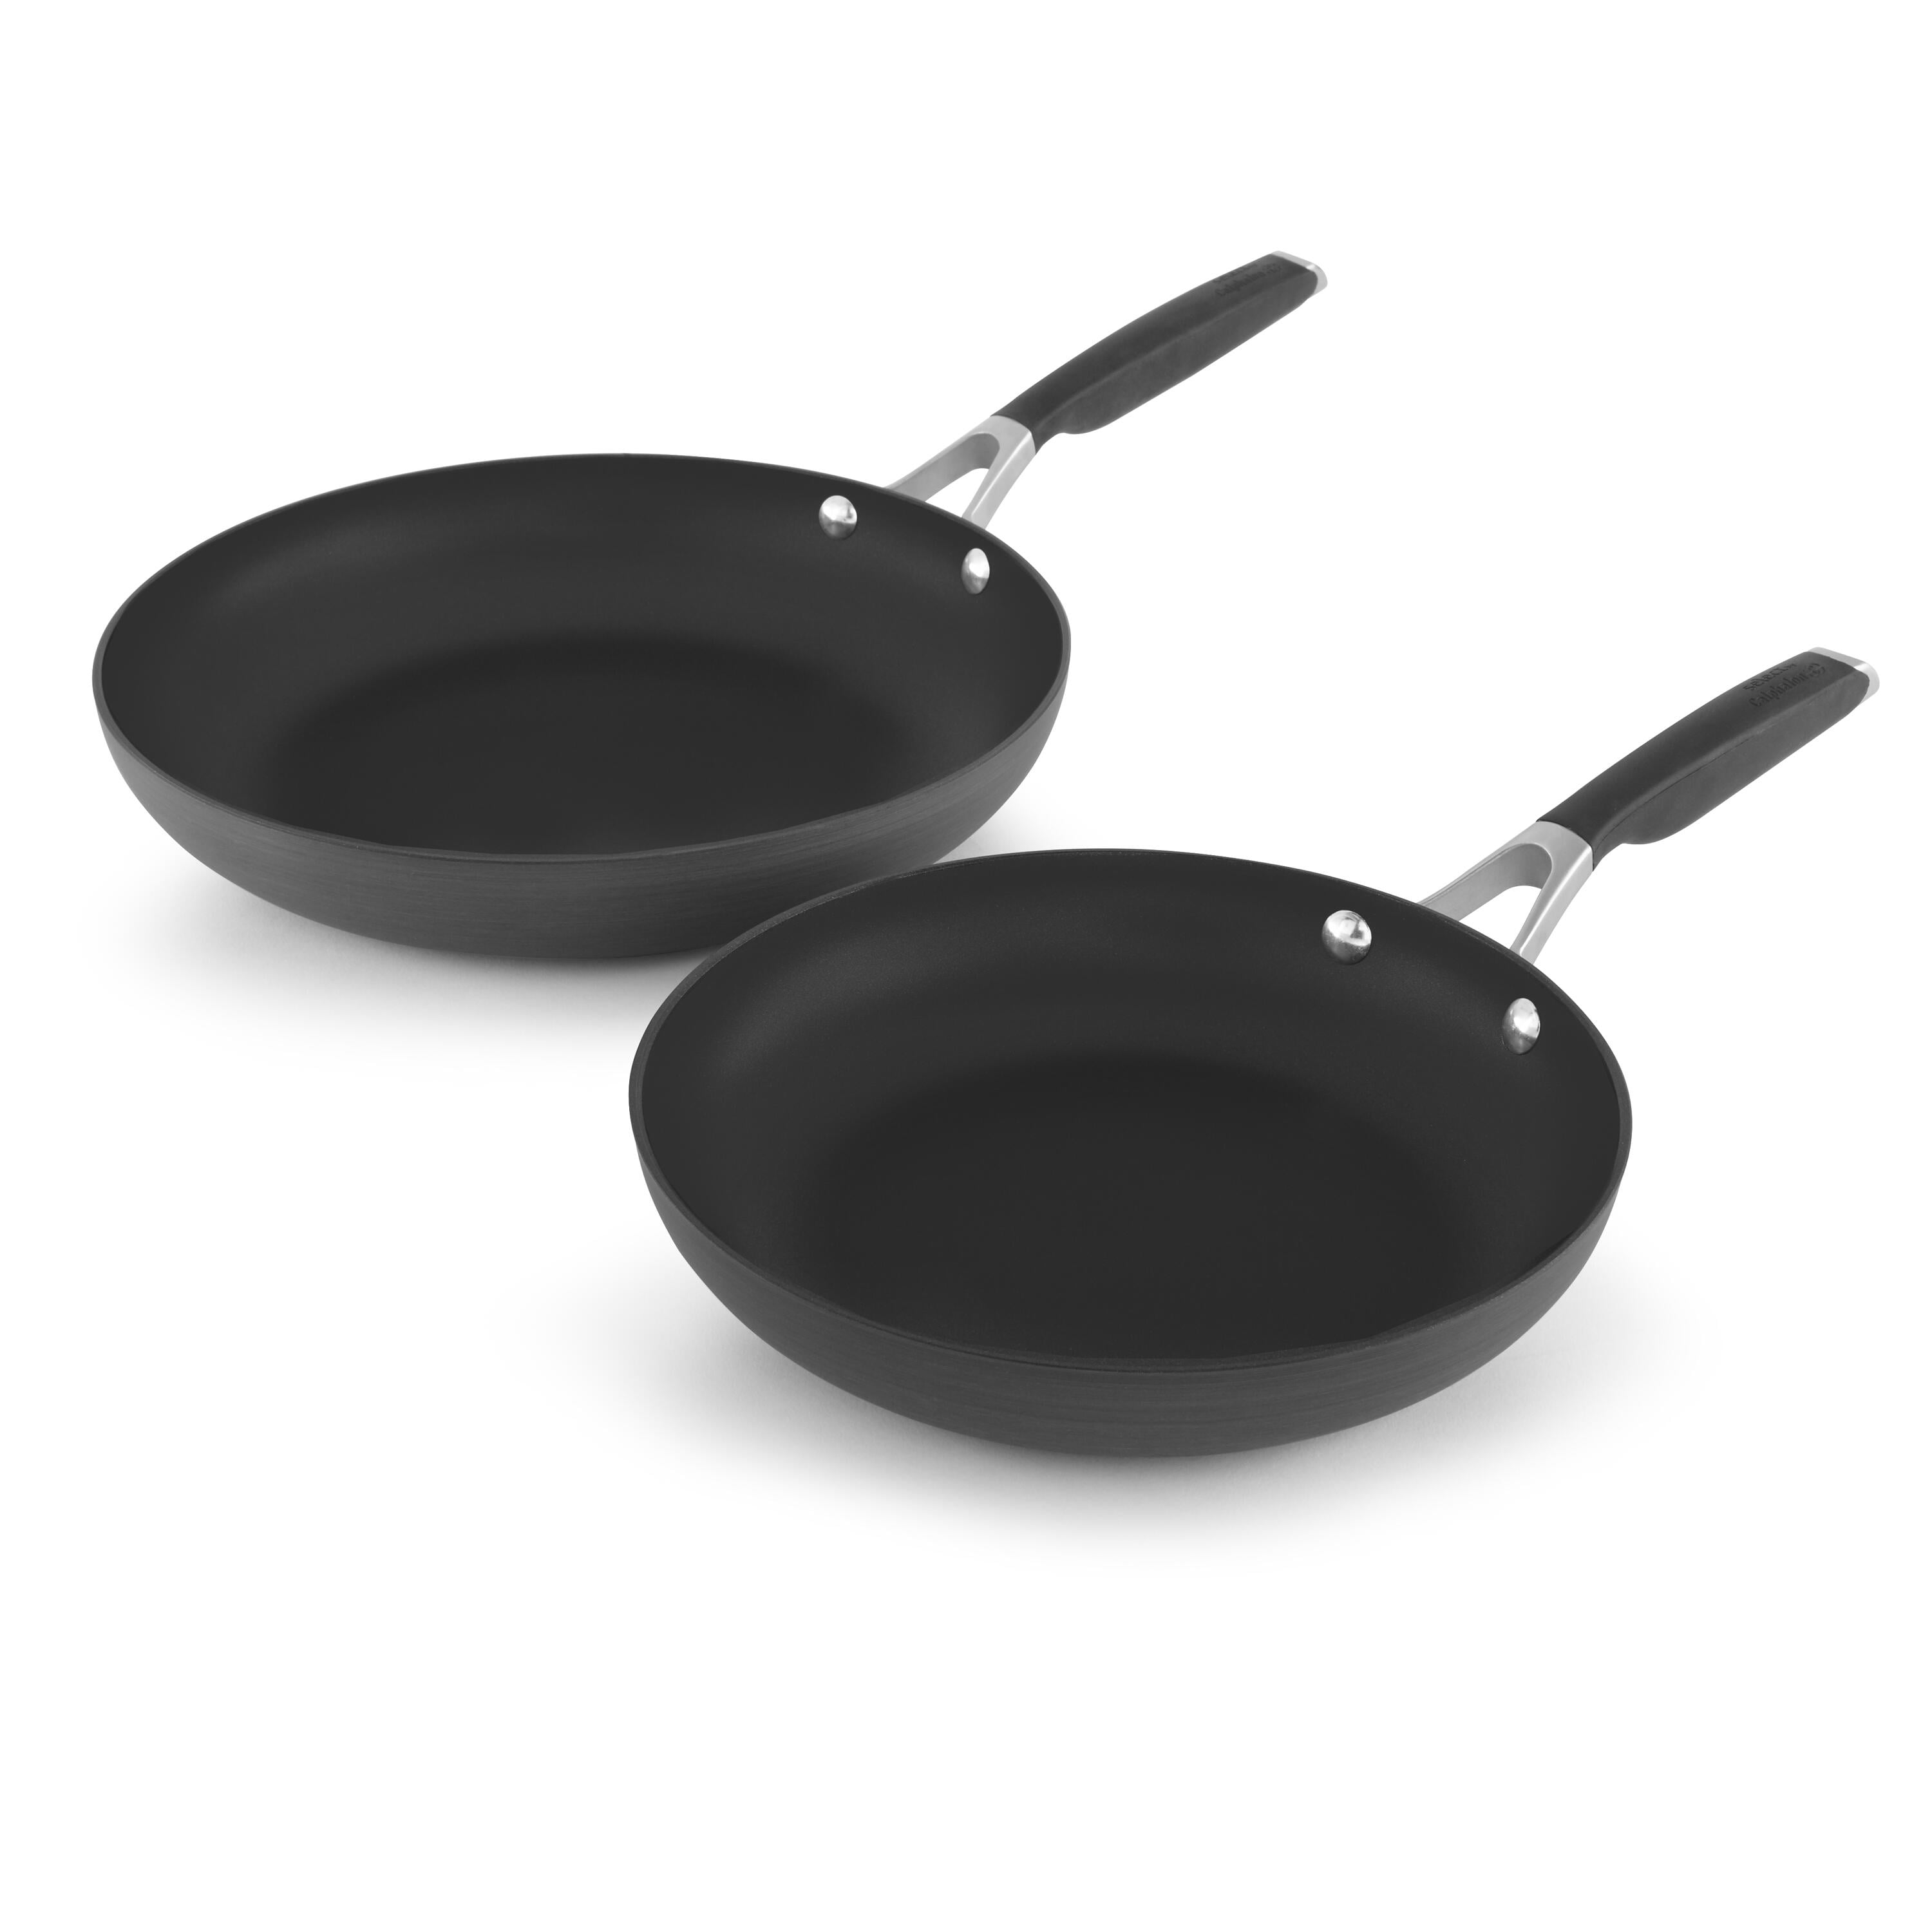 Select By Calphalon Nonstick 12” Inch 30.4 cm 39 17 Frying Pan 1392 With Lid